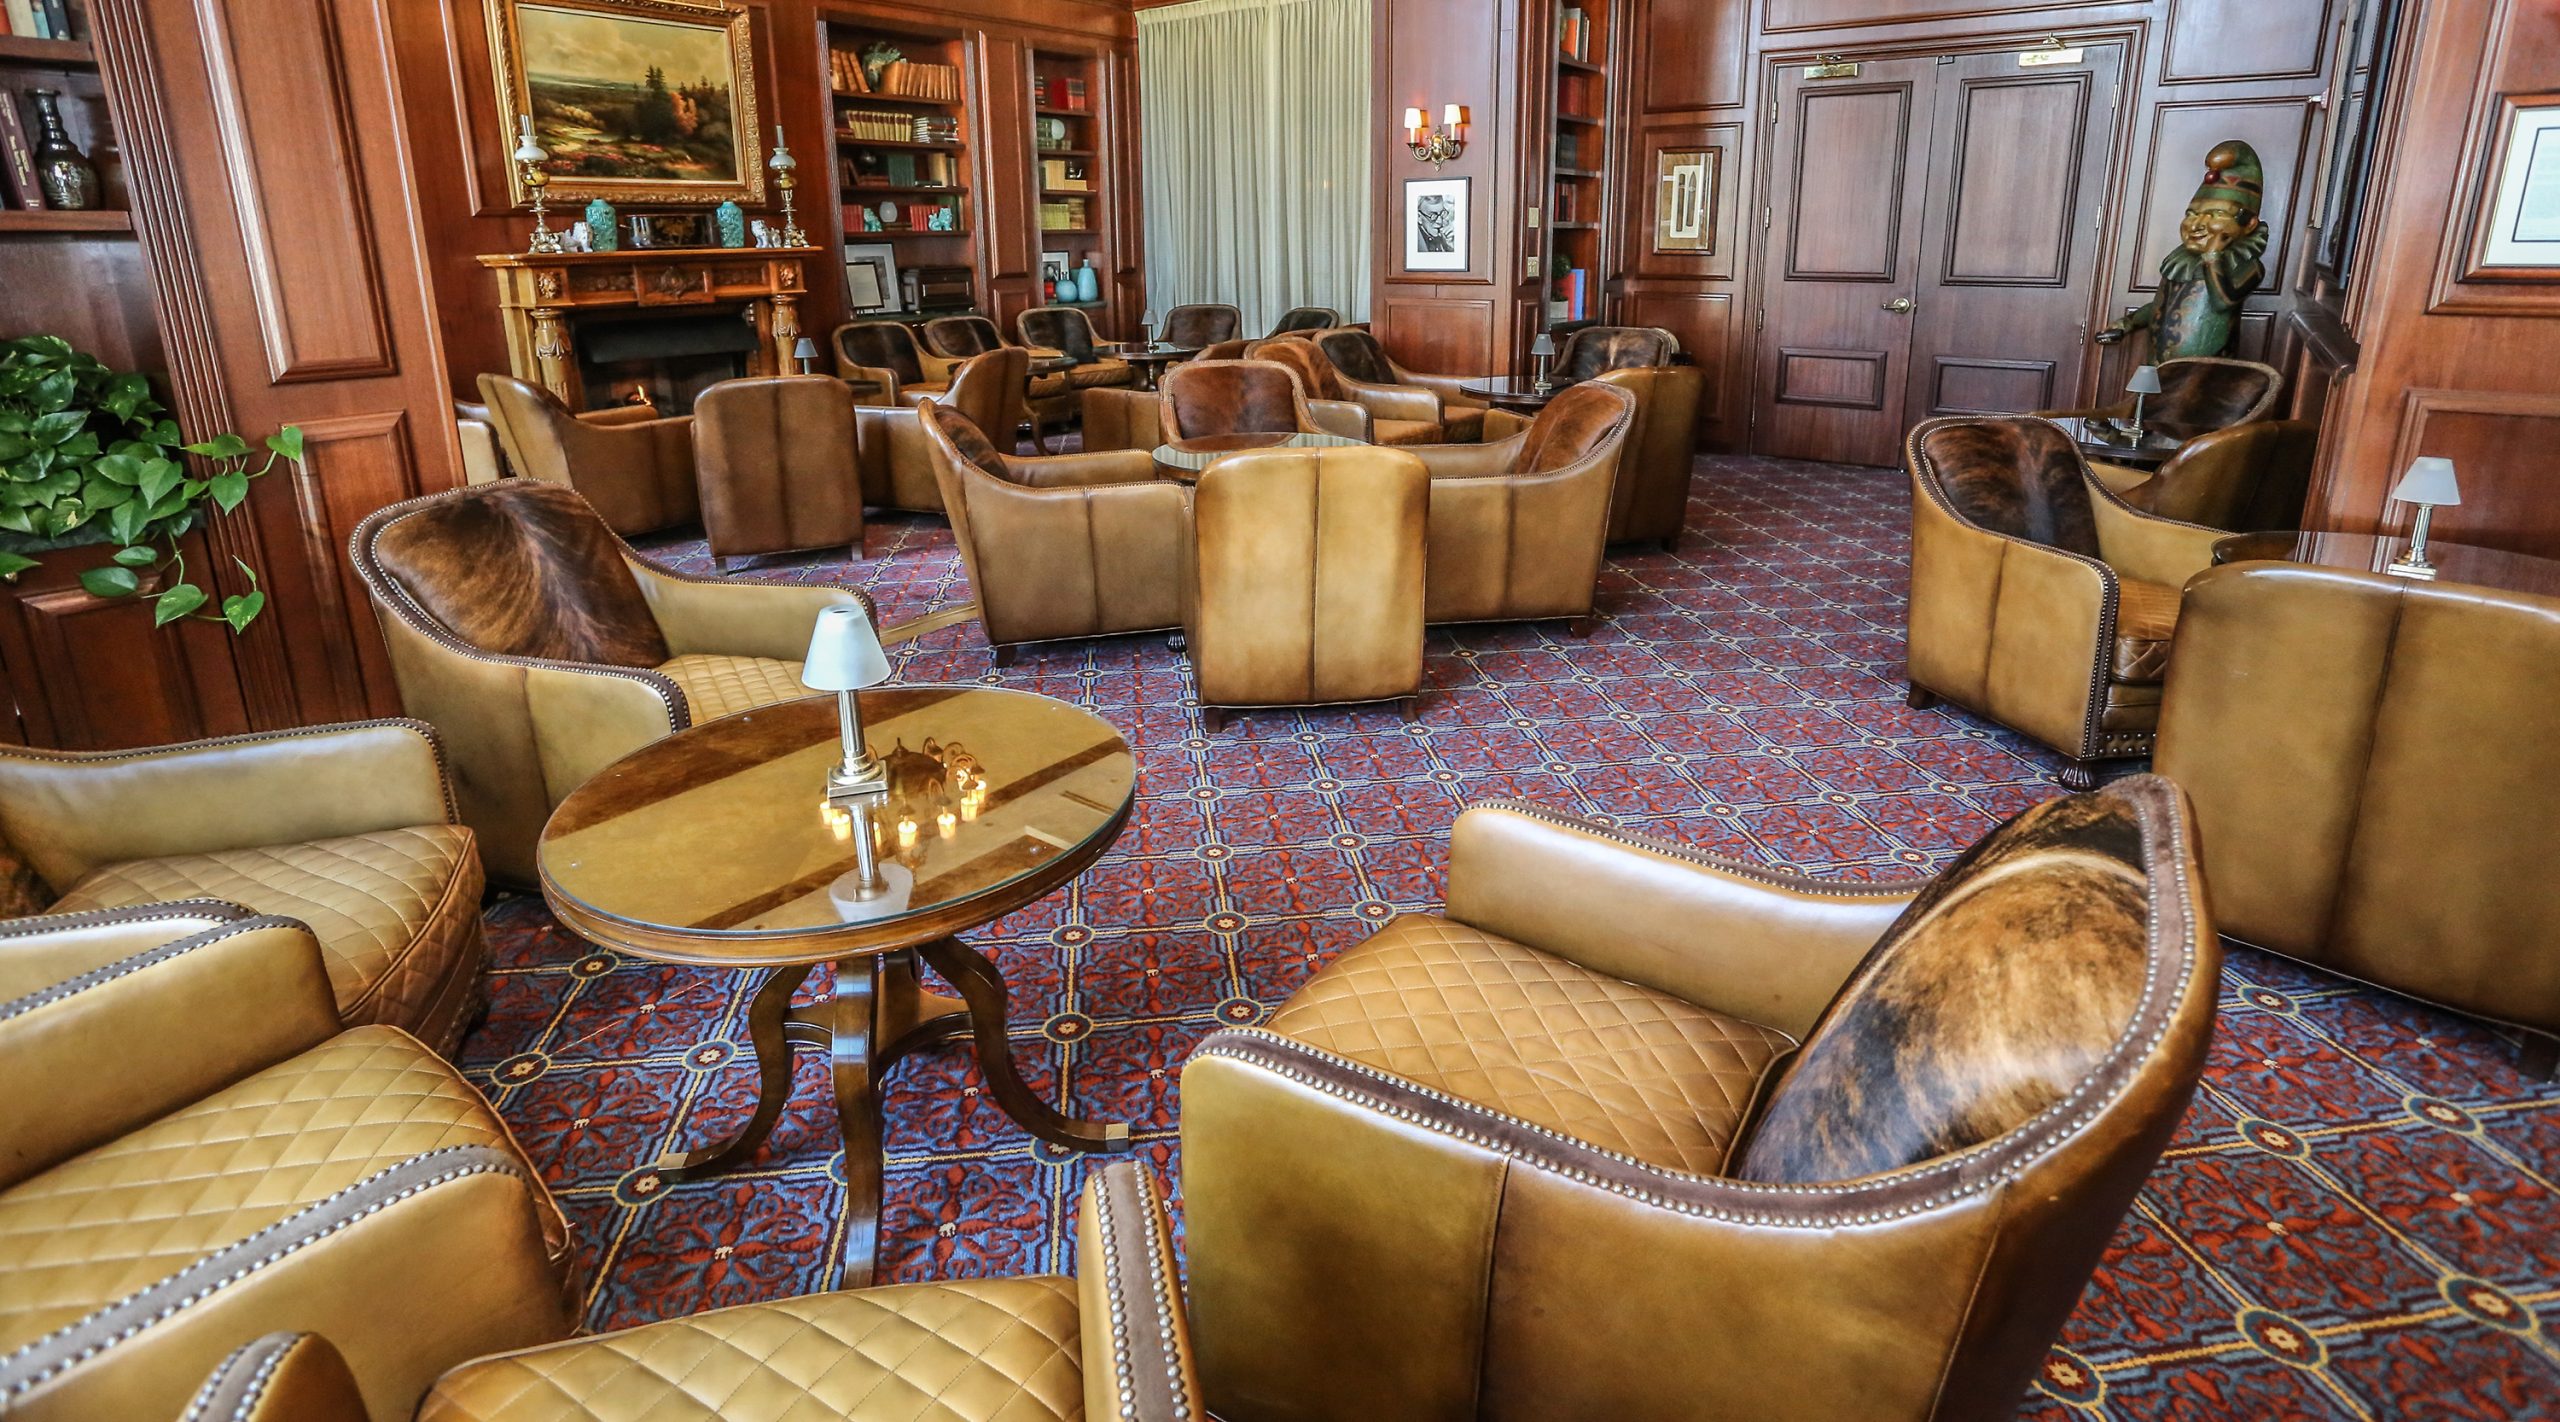 Chairs, tables, and seating inside The Hardy Room cigar lounge at Nemacolin